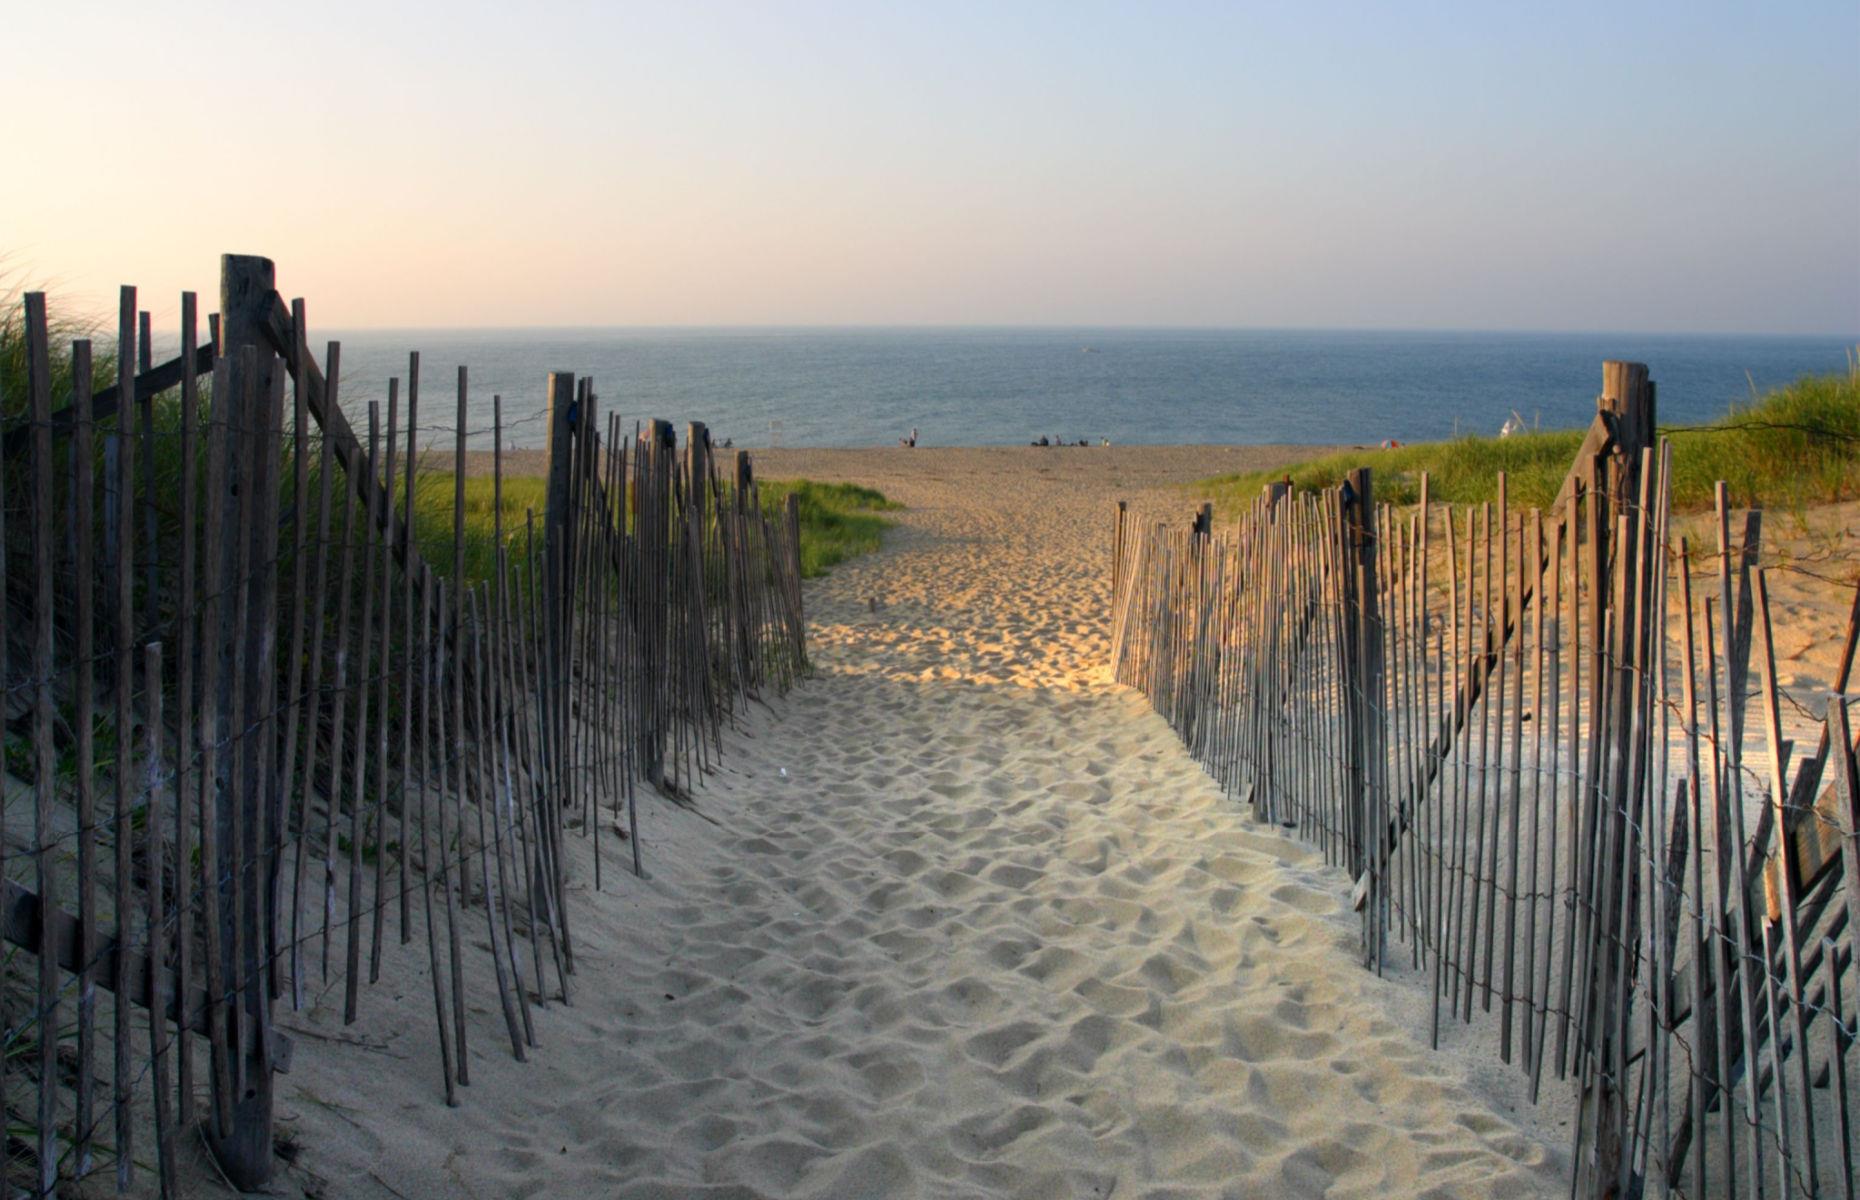 <p>There’s no ugly way to pass through Cape Cod, the peninsula that flexes into the ocean from the Massachusetts coastline. If you really want to get close to the water, though, you can’t beat <a href="https://www.capecodchamber.org/things-to-do/historic-route-6a/">Historic Route 6A</a>, also known as Old King's Highway. The route runs for 62 miles (100km) by Cape Cod Bay, passing pale sandy beaches, lighthouses, salt marshes, cranberry bogs, historic towns and state parks.</p>